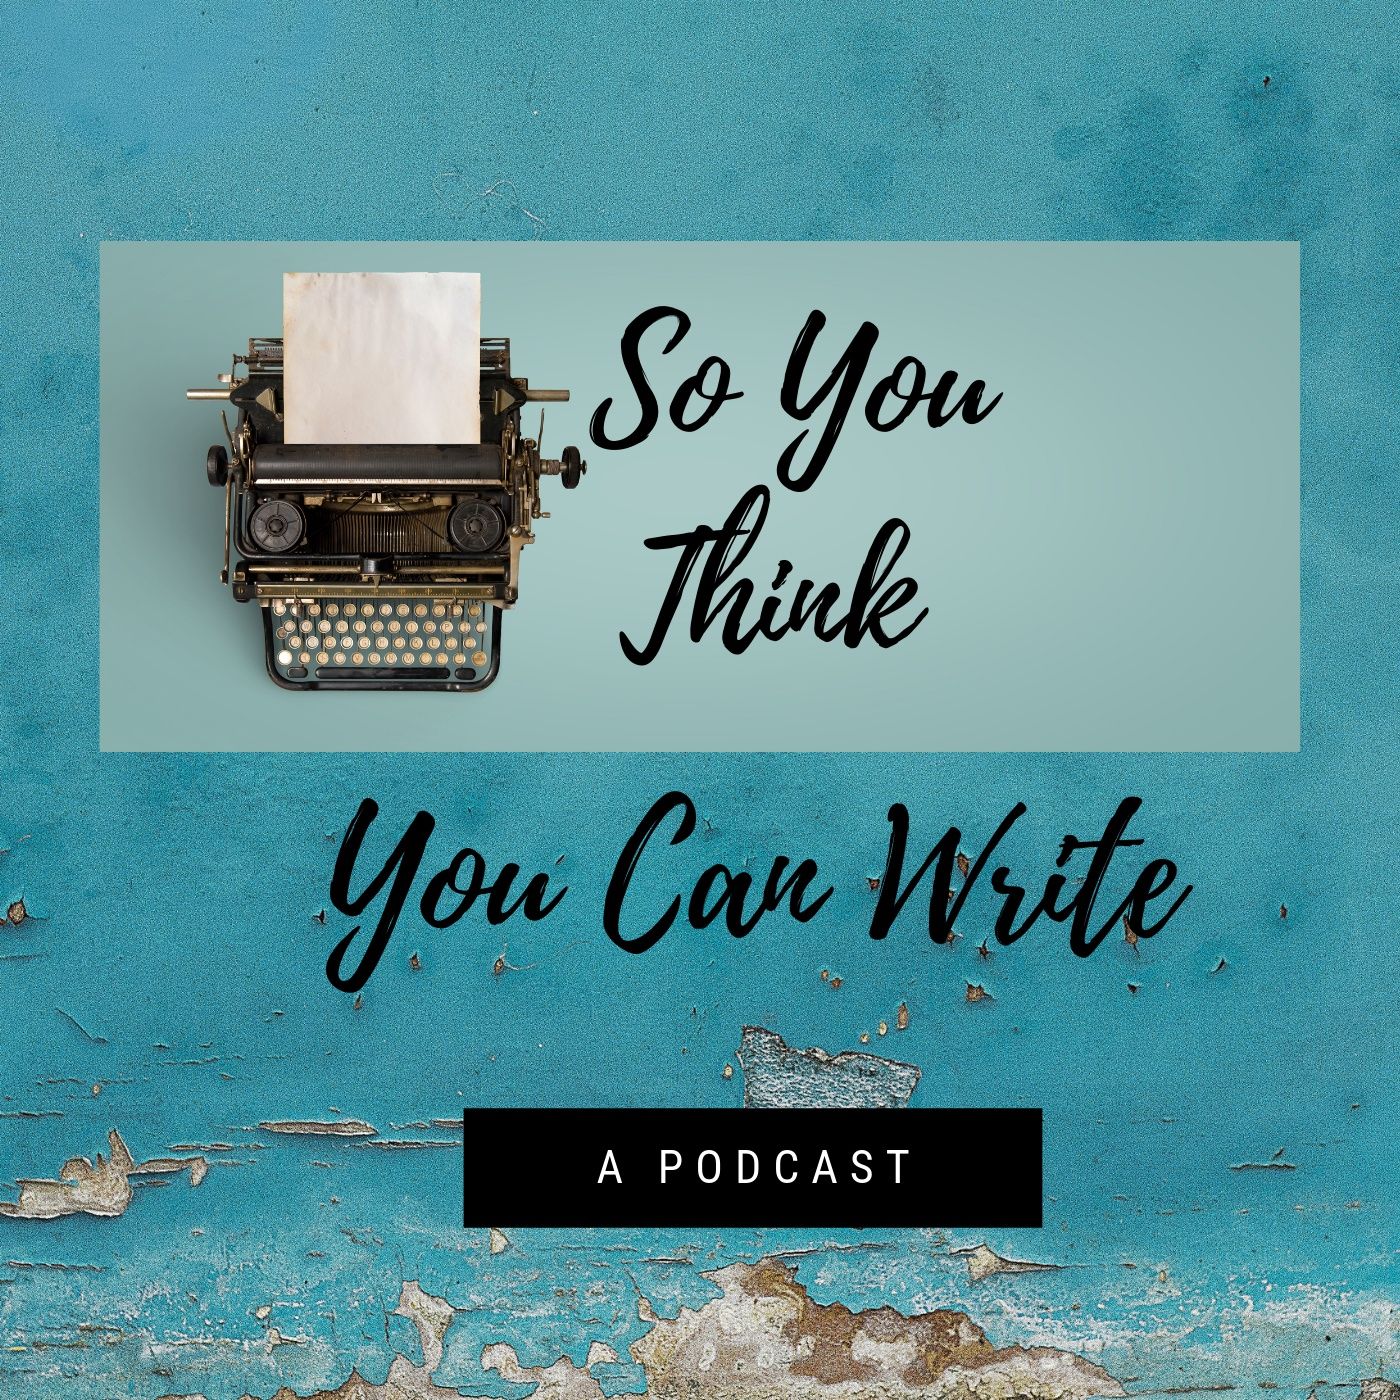 So You Think You Can Write